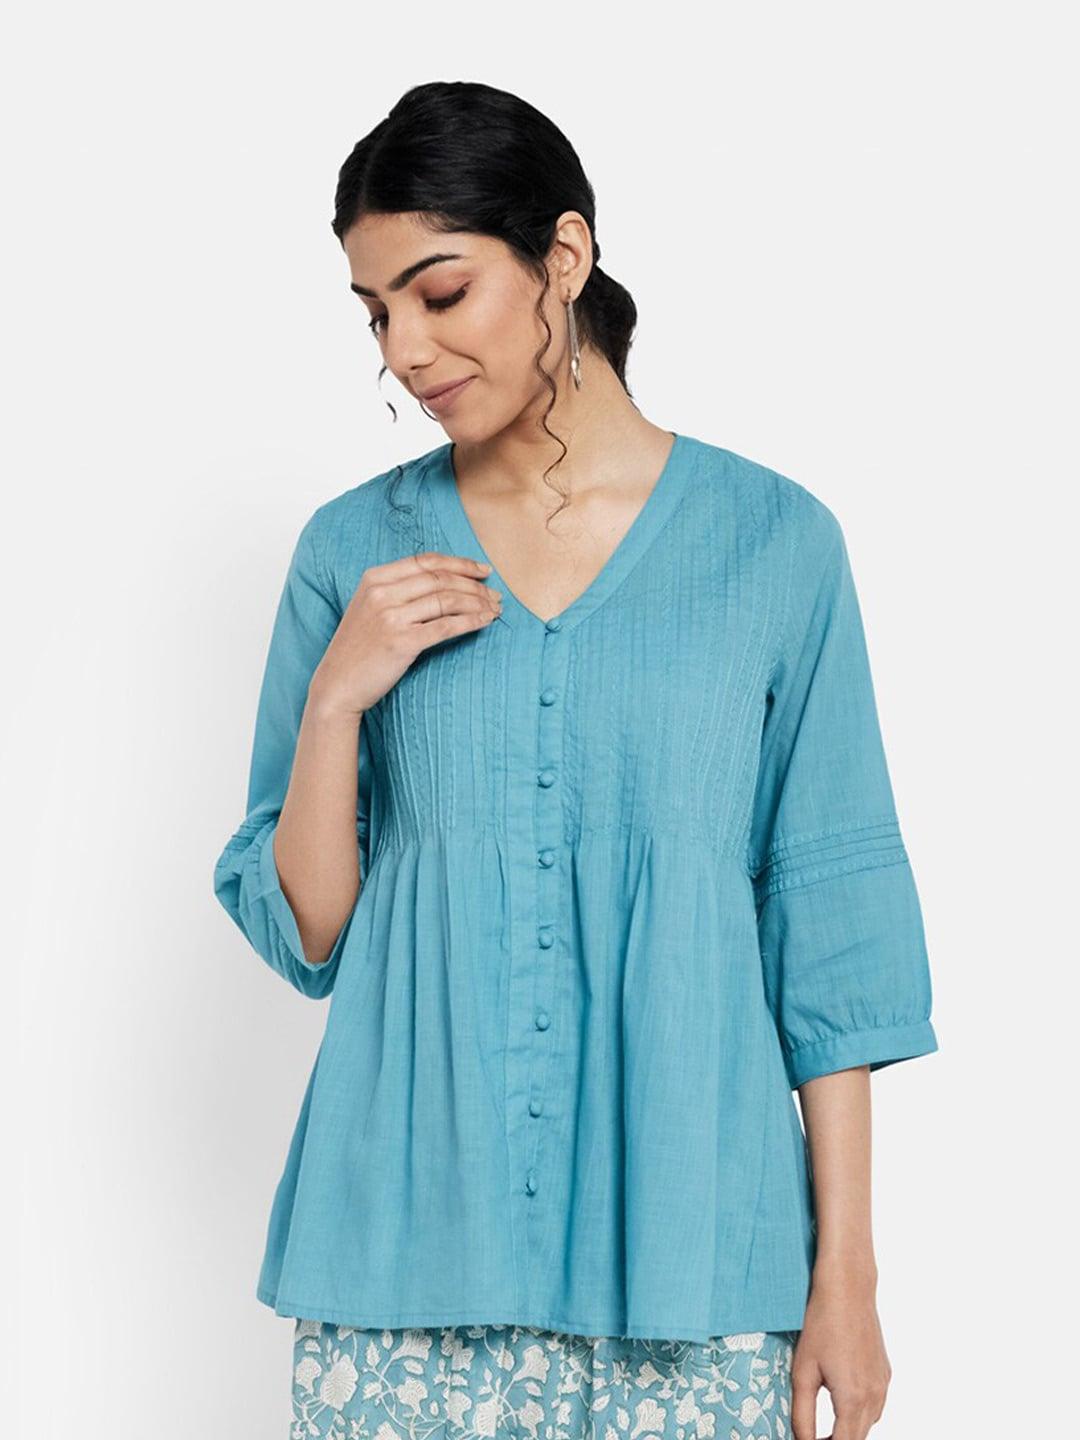 Fabindia Blue Solid Cotton A-Line Top